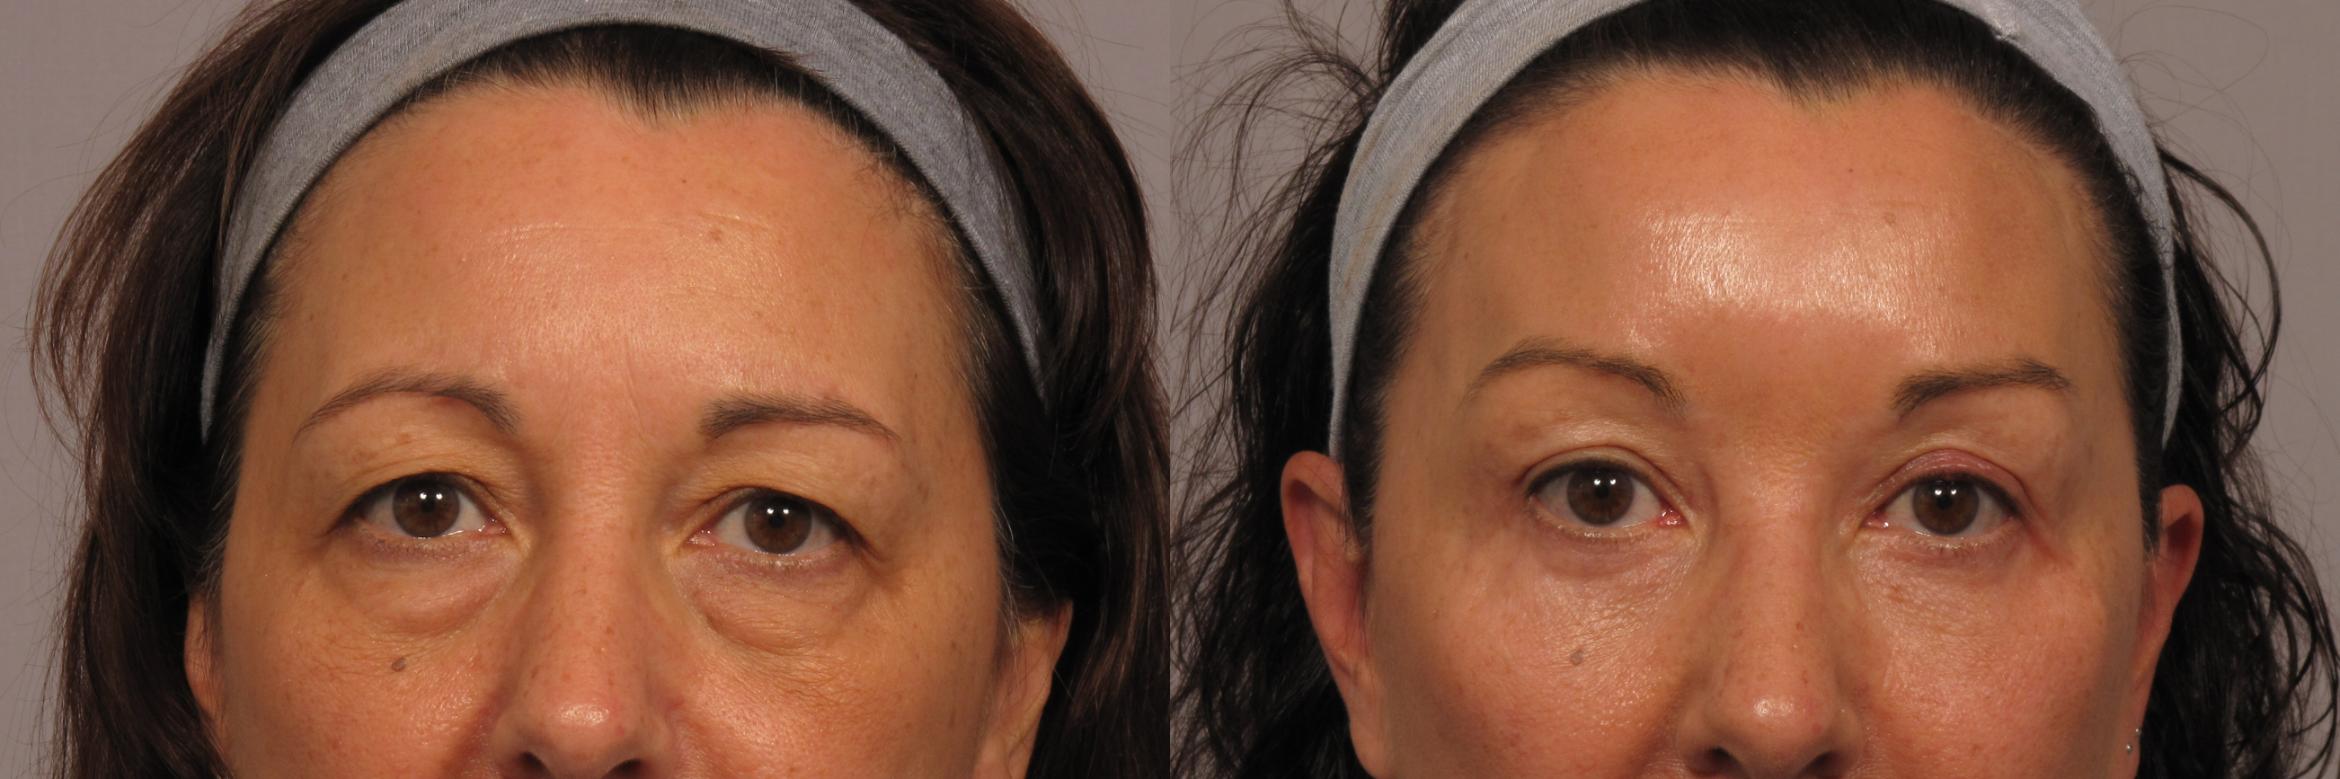 Before and after blepharoplasty performed by Dr Anthony Maloof - Oculoplastic surgeon Sydney